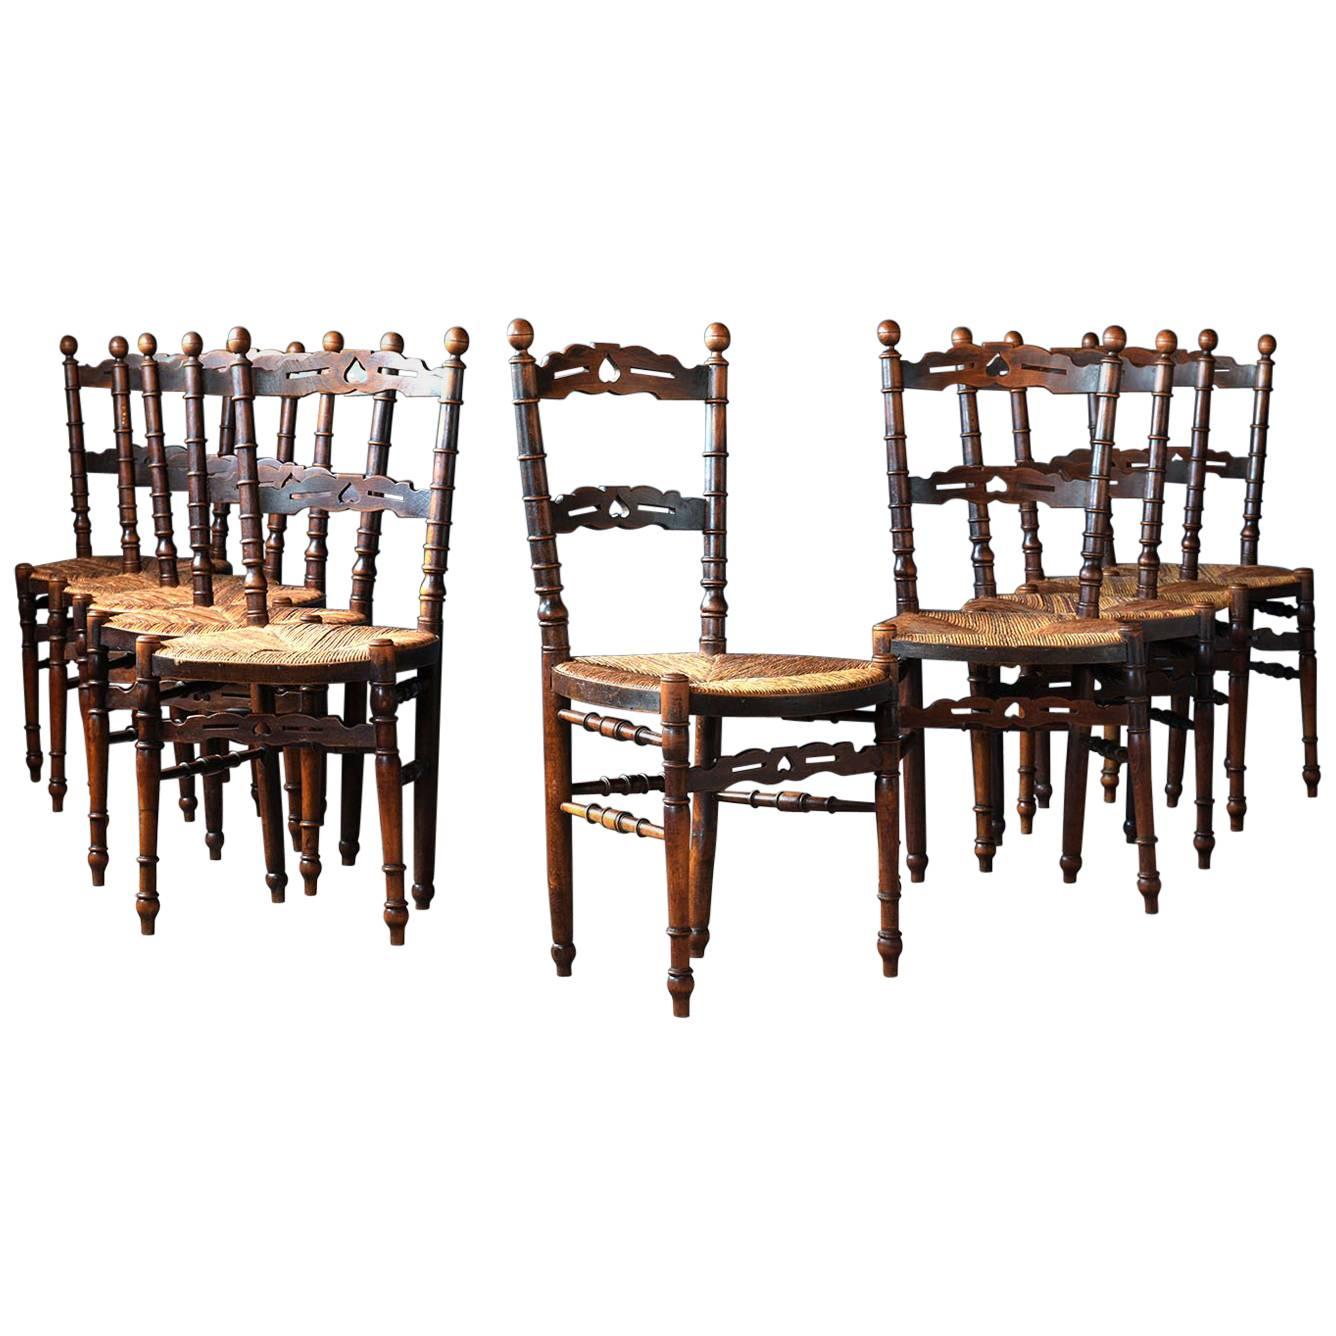 Set of Ten Provincial Walnut Dining Room Chairs, circa 1900